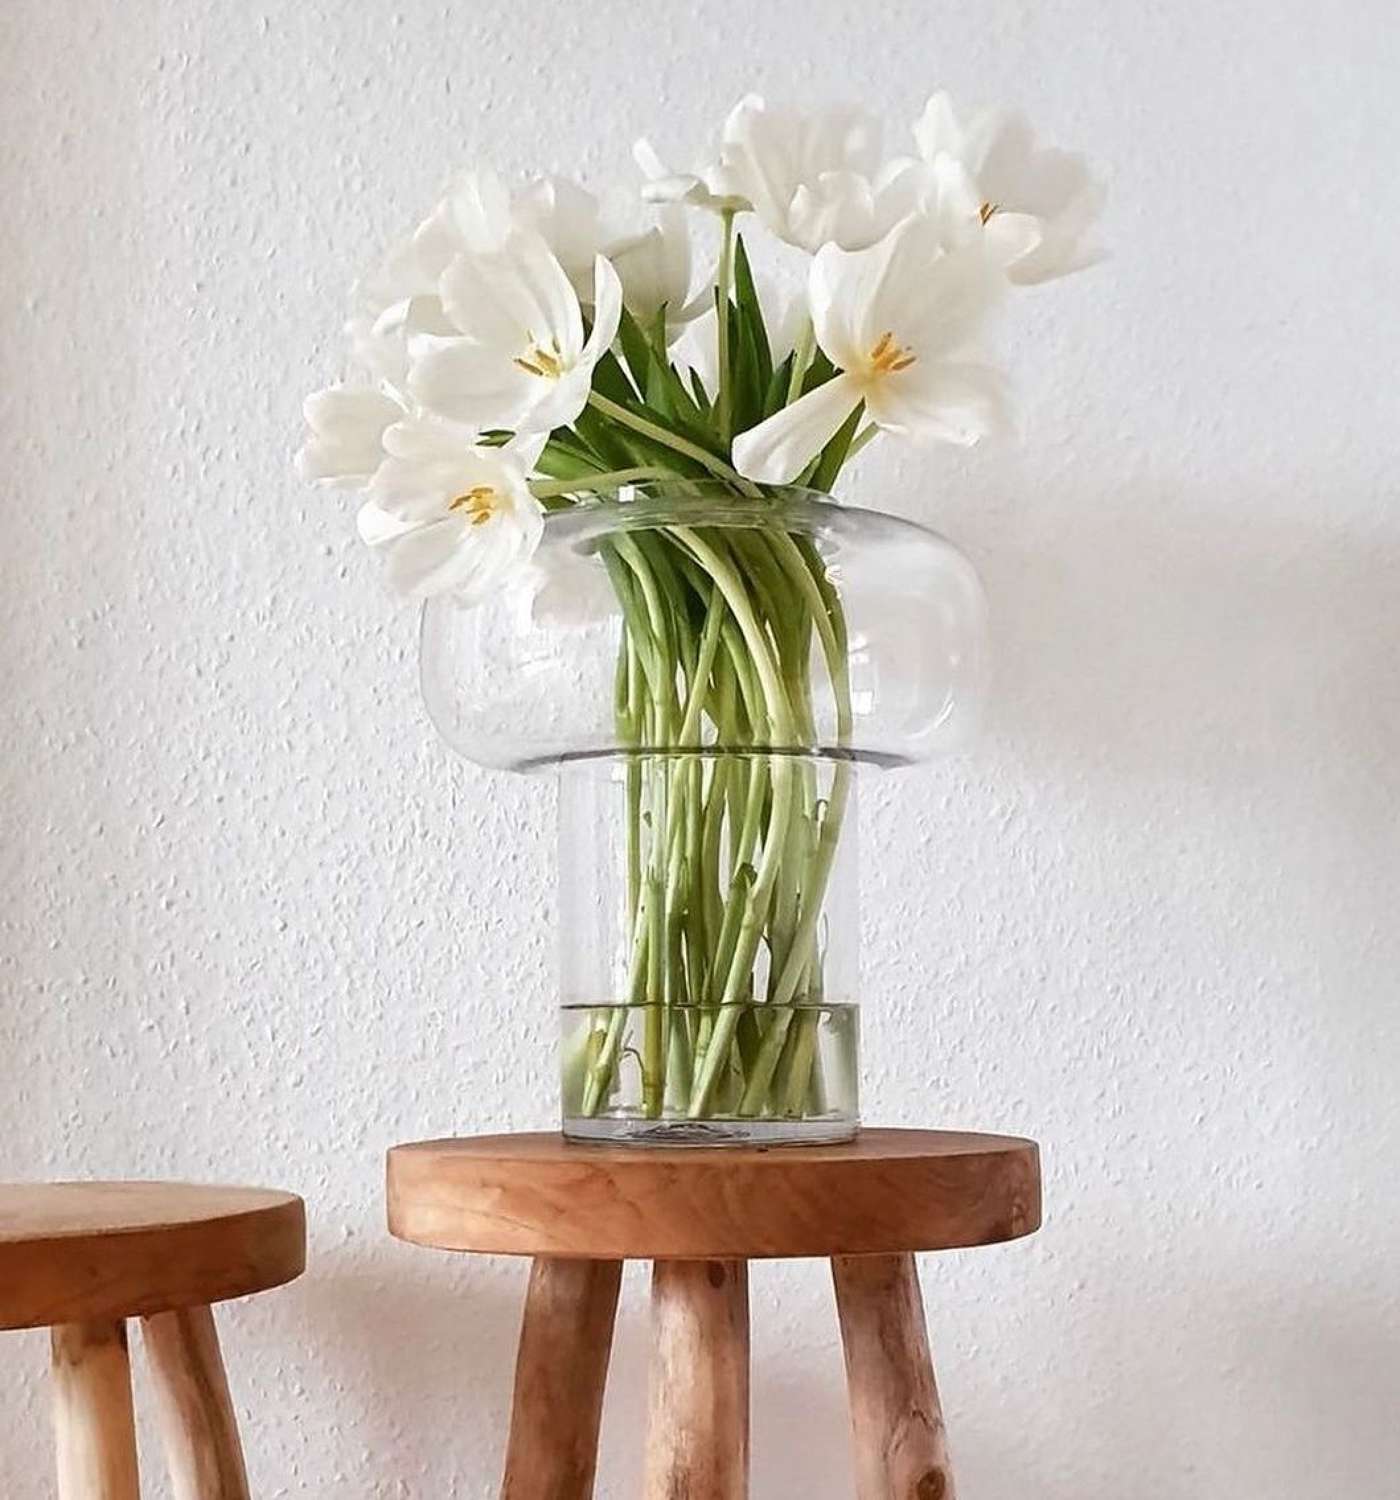 Large clear glass vase